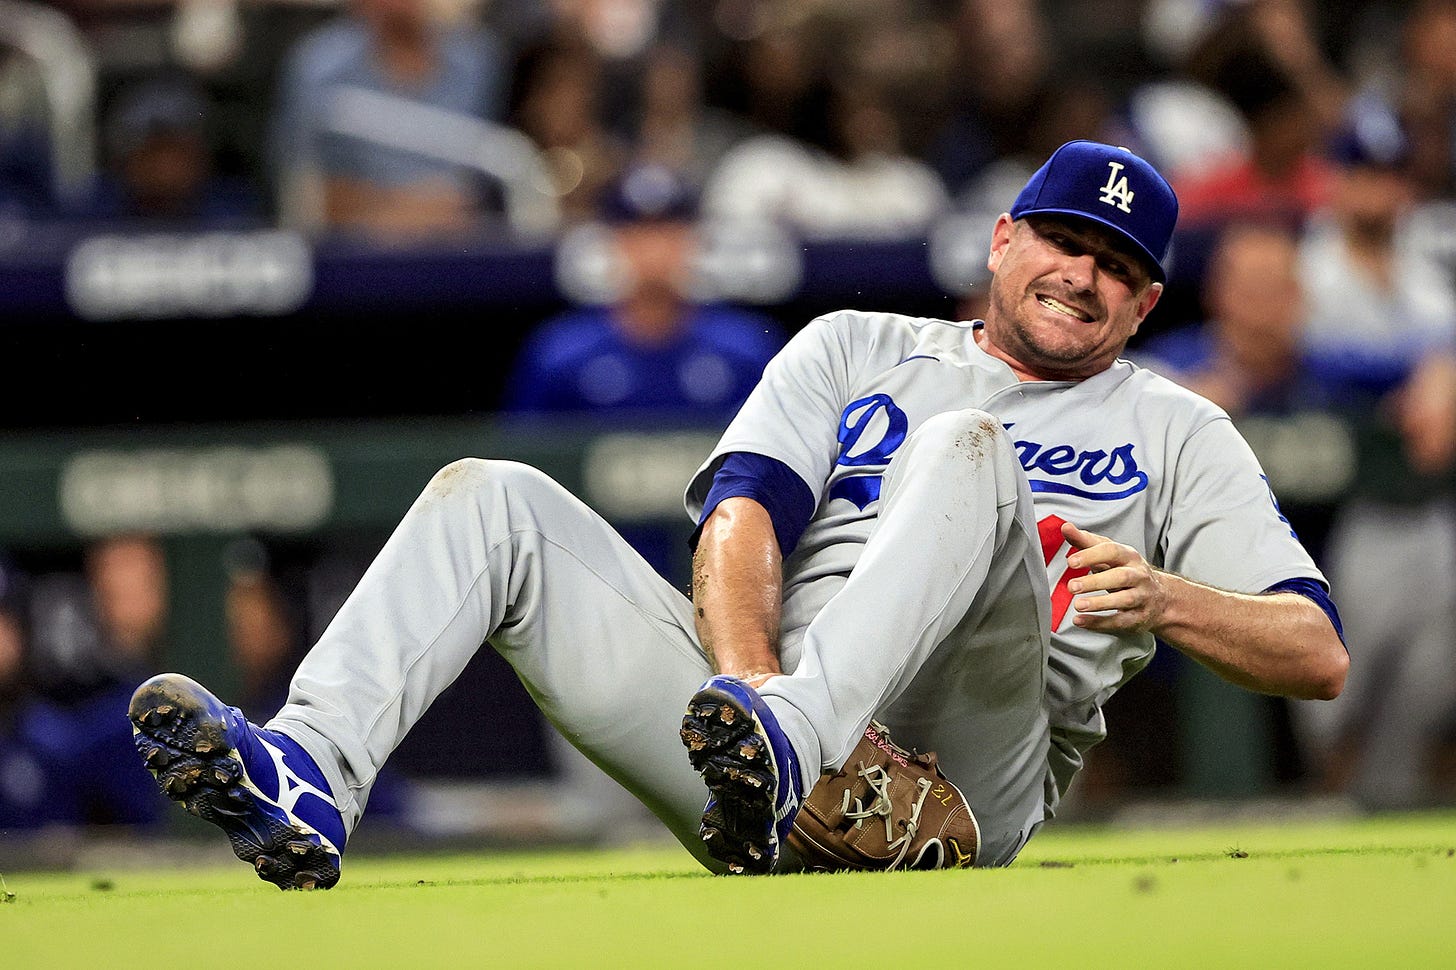 Daniel Hudson injury: Dodgers pitcher tore ACL, out for year